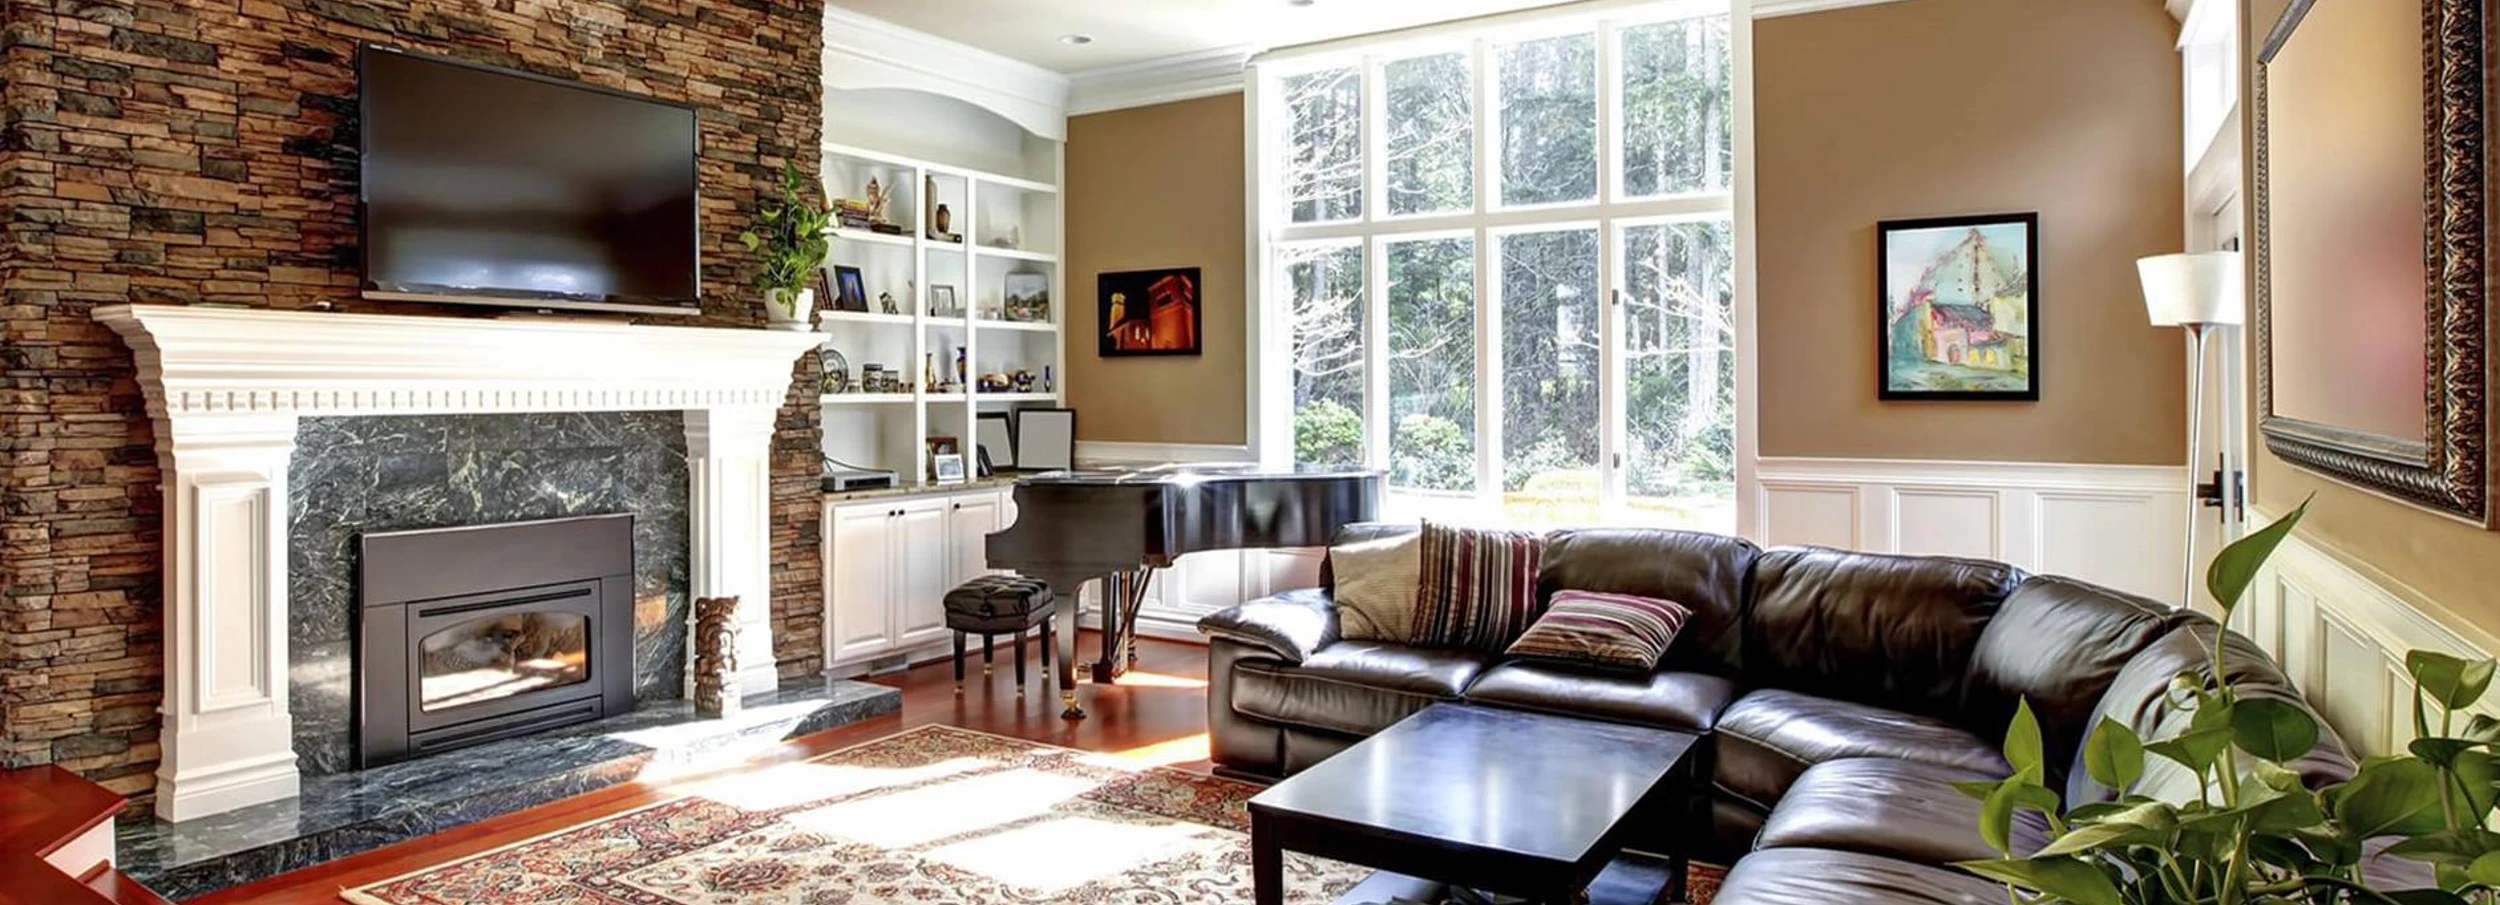 Bright, cozy living room with fireplace and brown leather sofa and walls painted in parchment colored paint.